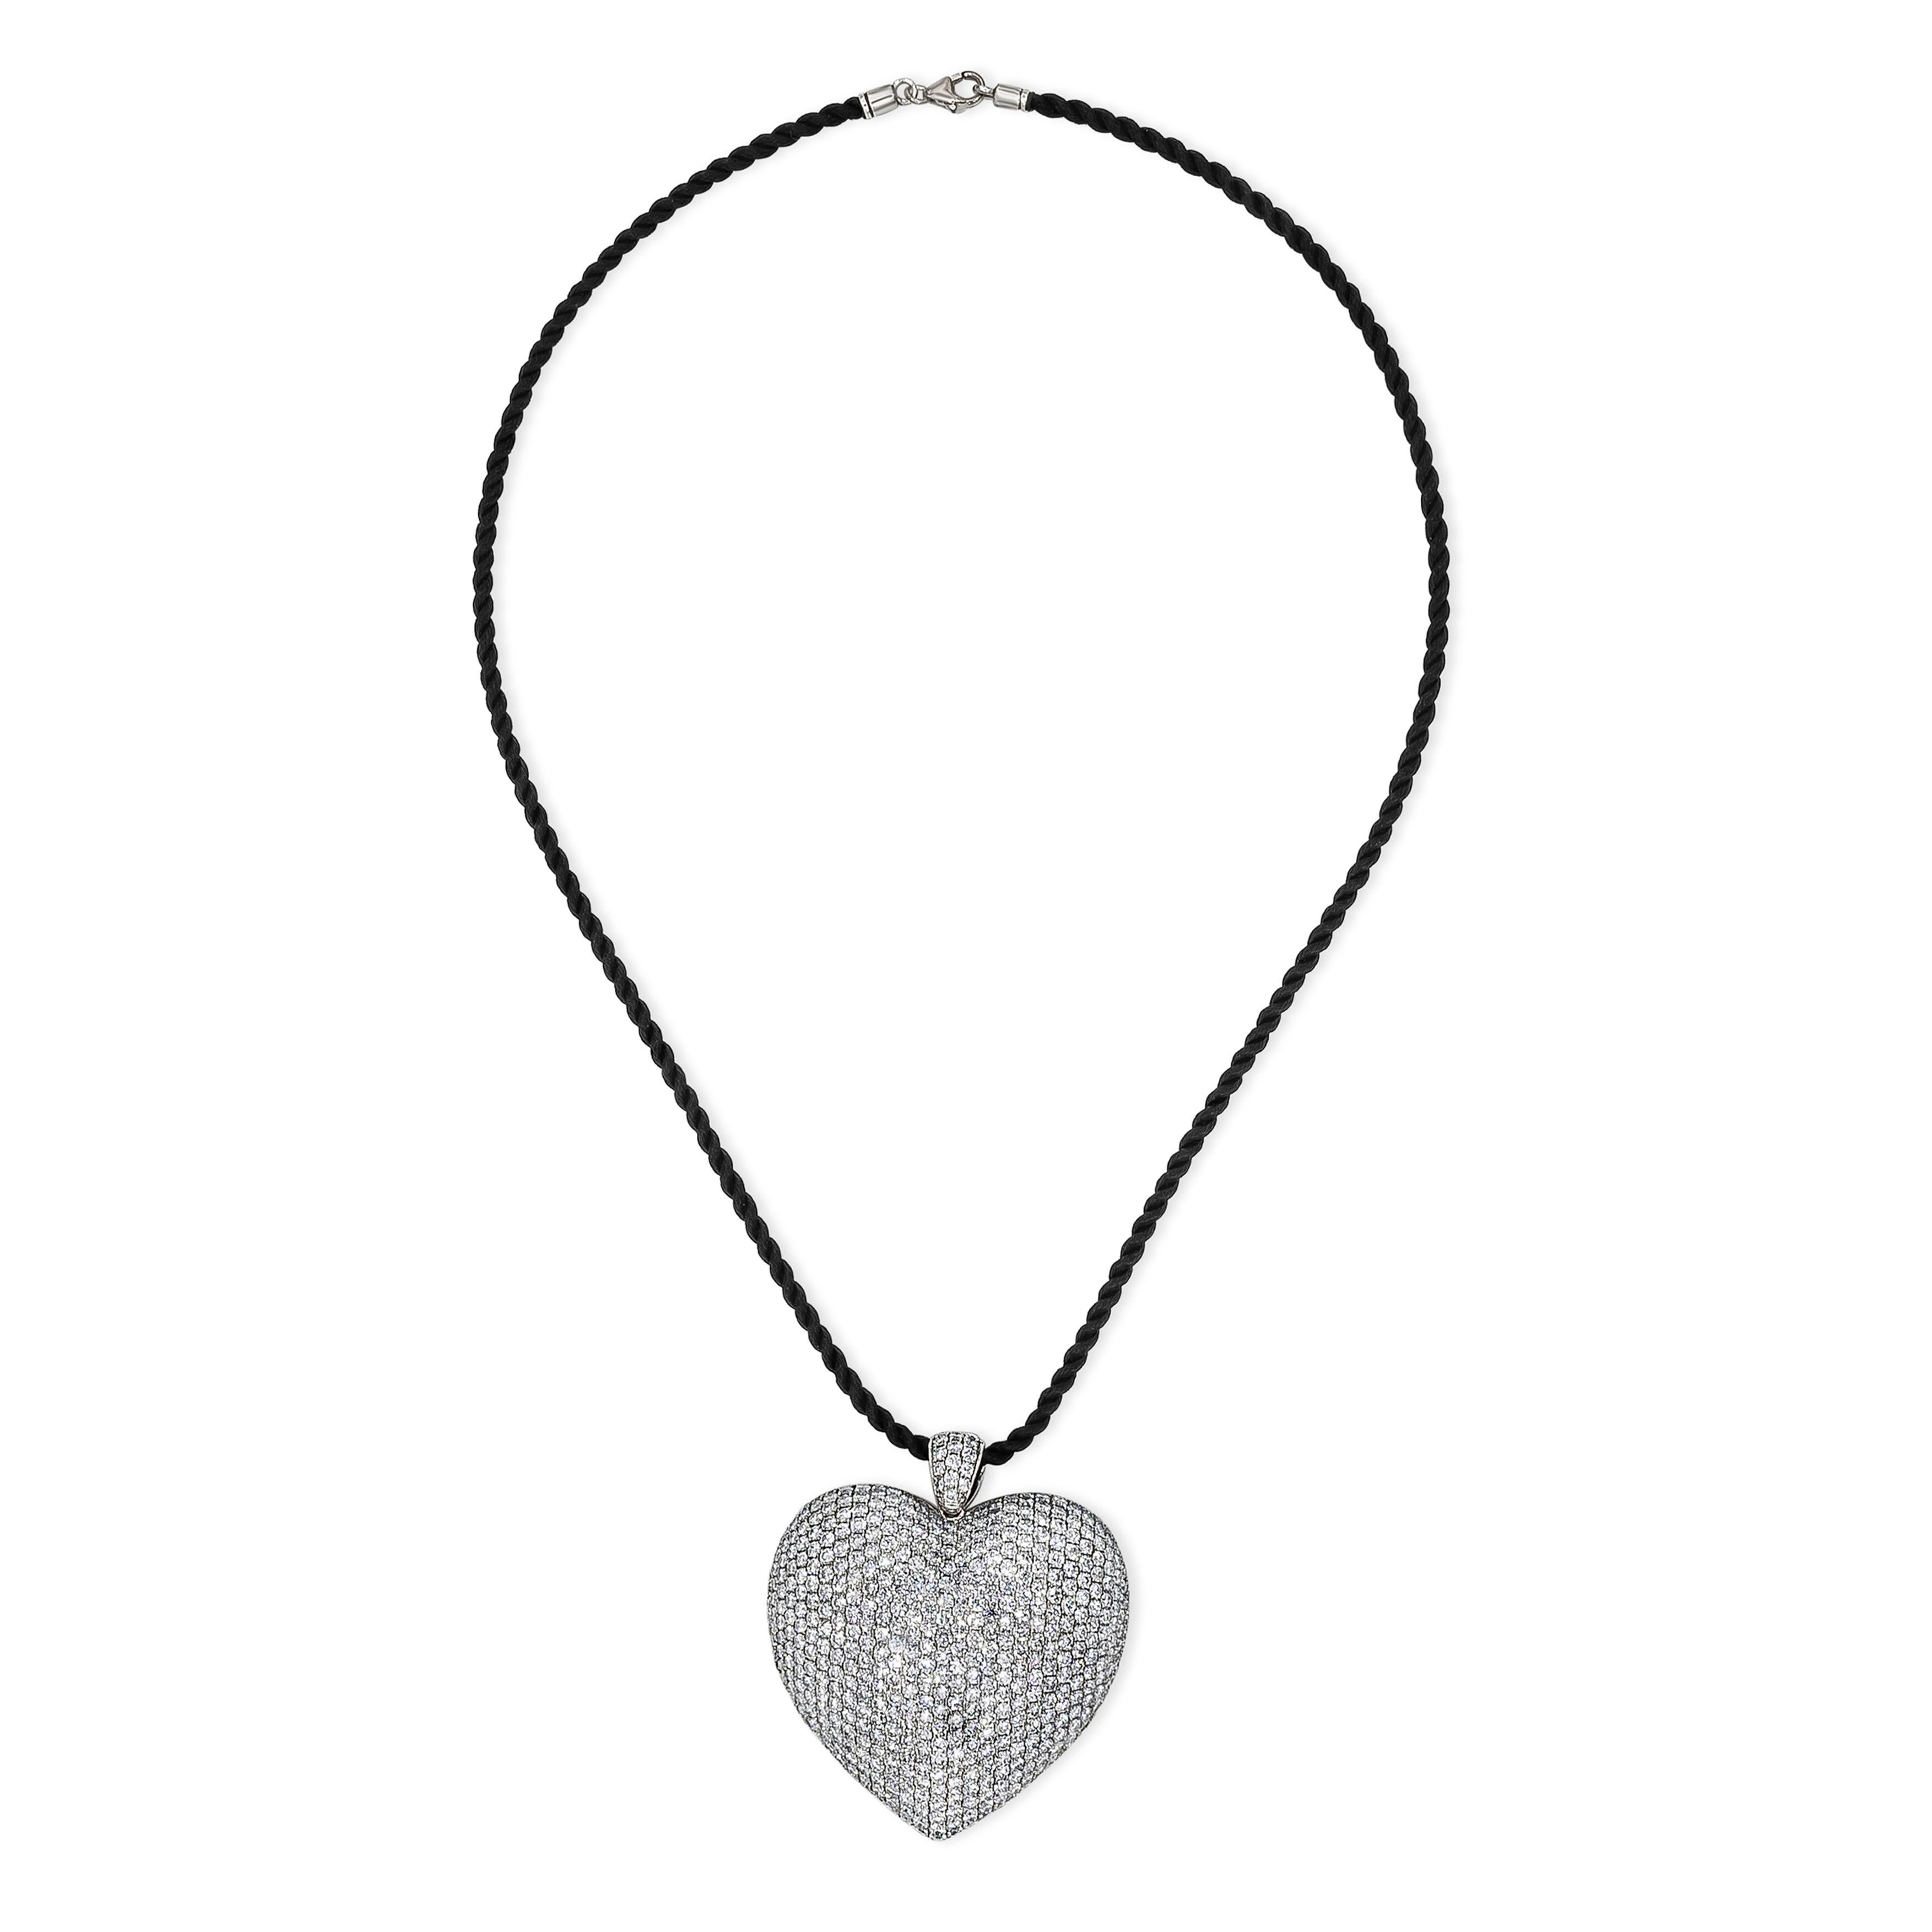 An important and beautiful pendant necklace showcasing a cluster of round brilliant diamonds set in a domed heart shape pendant made in 18k white gold. Diamonds weigh 16.70 carats total. Suspended on a 18 inch rope. 

Style available in different